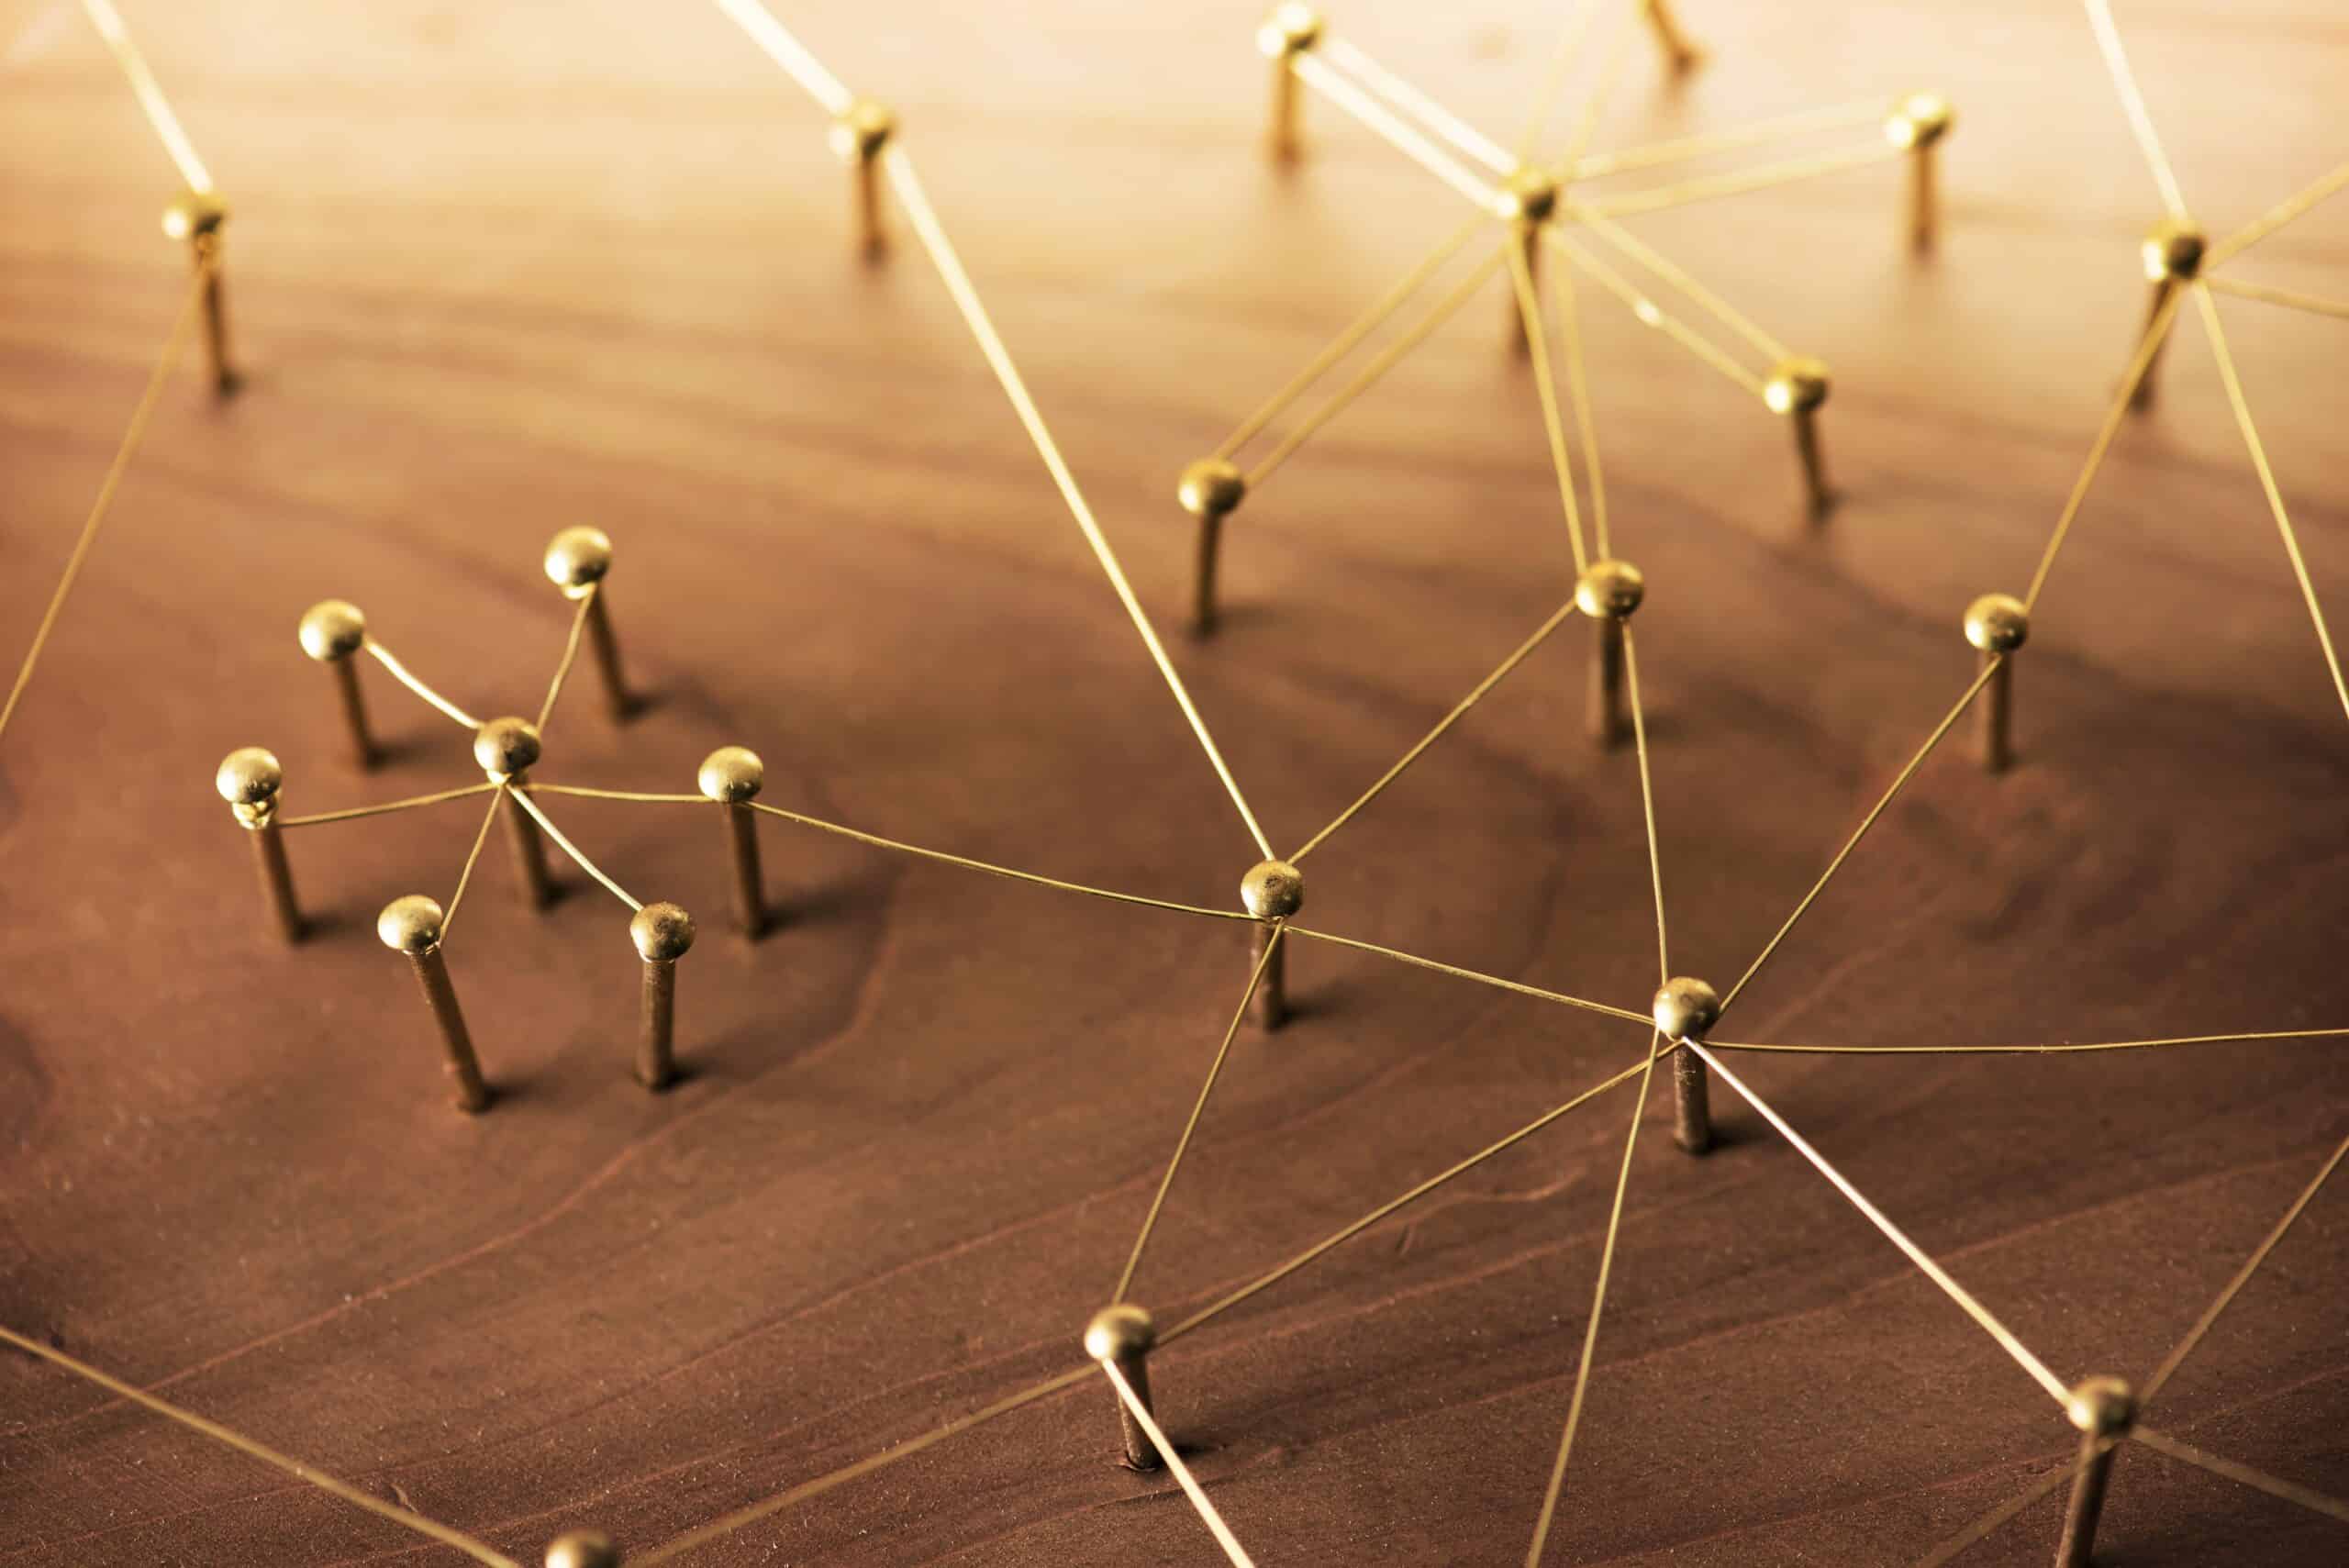 Multiple brass pins linked with golden strings creating a web of connections on a wooden surface.